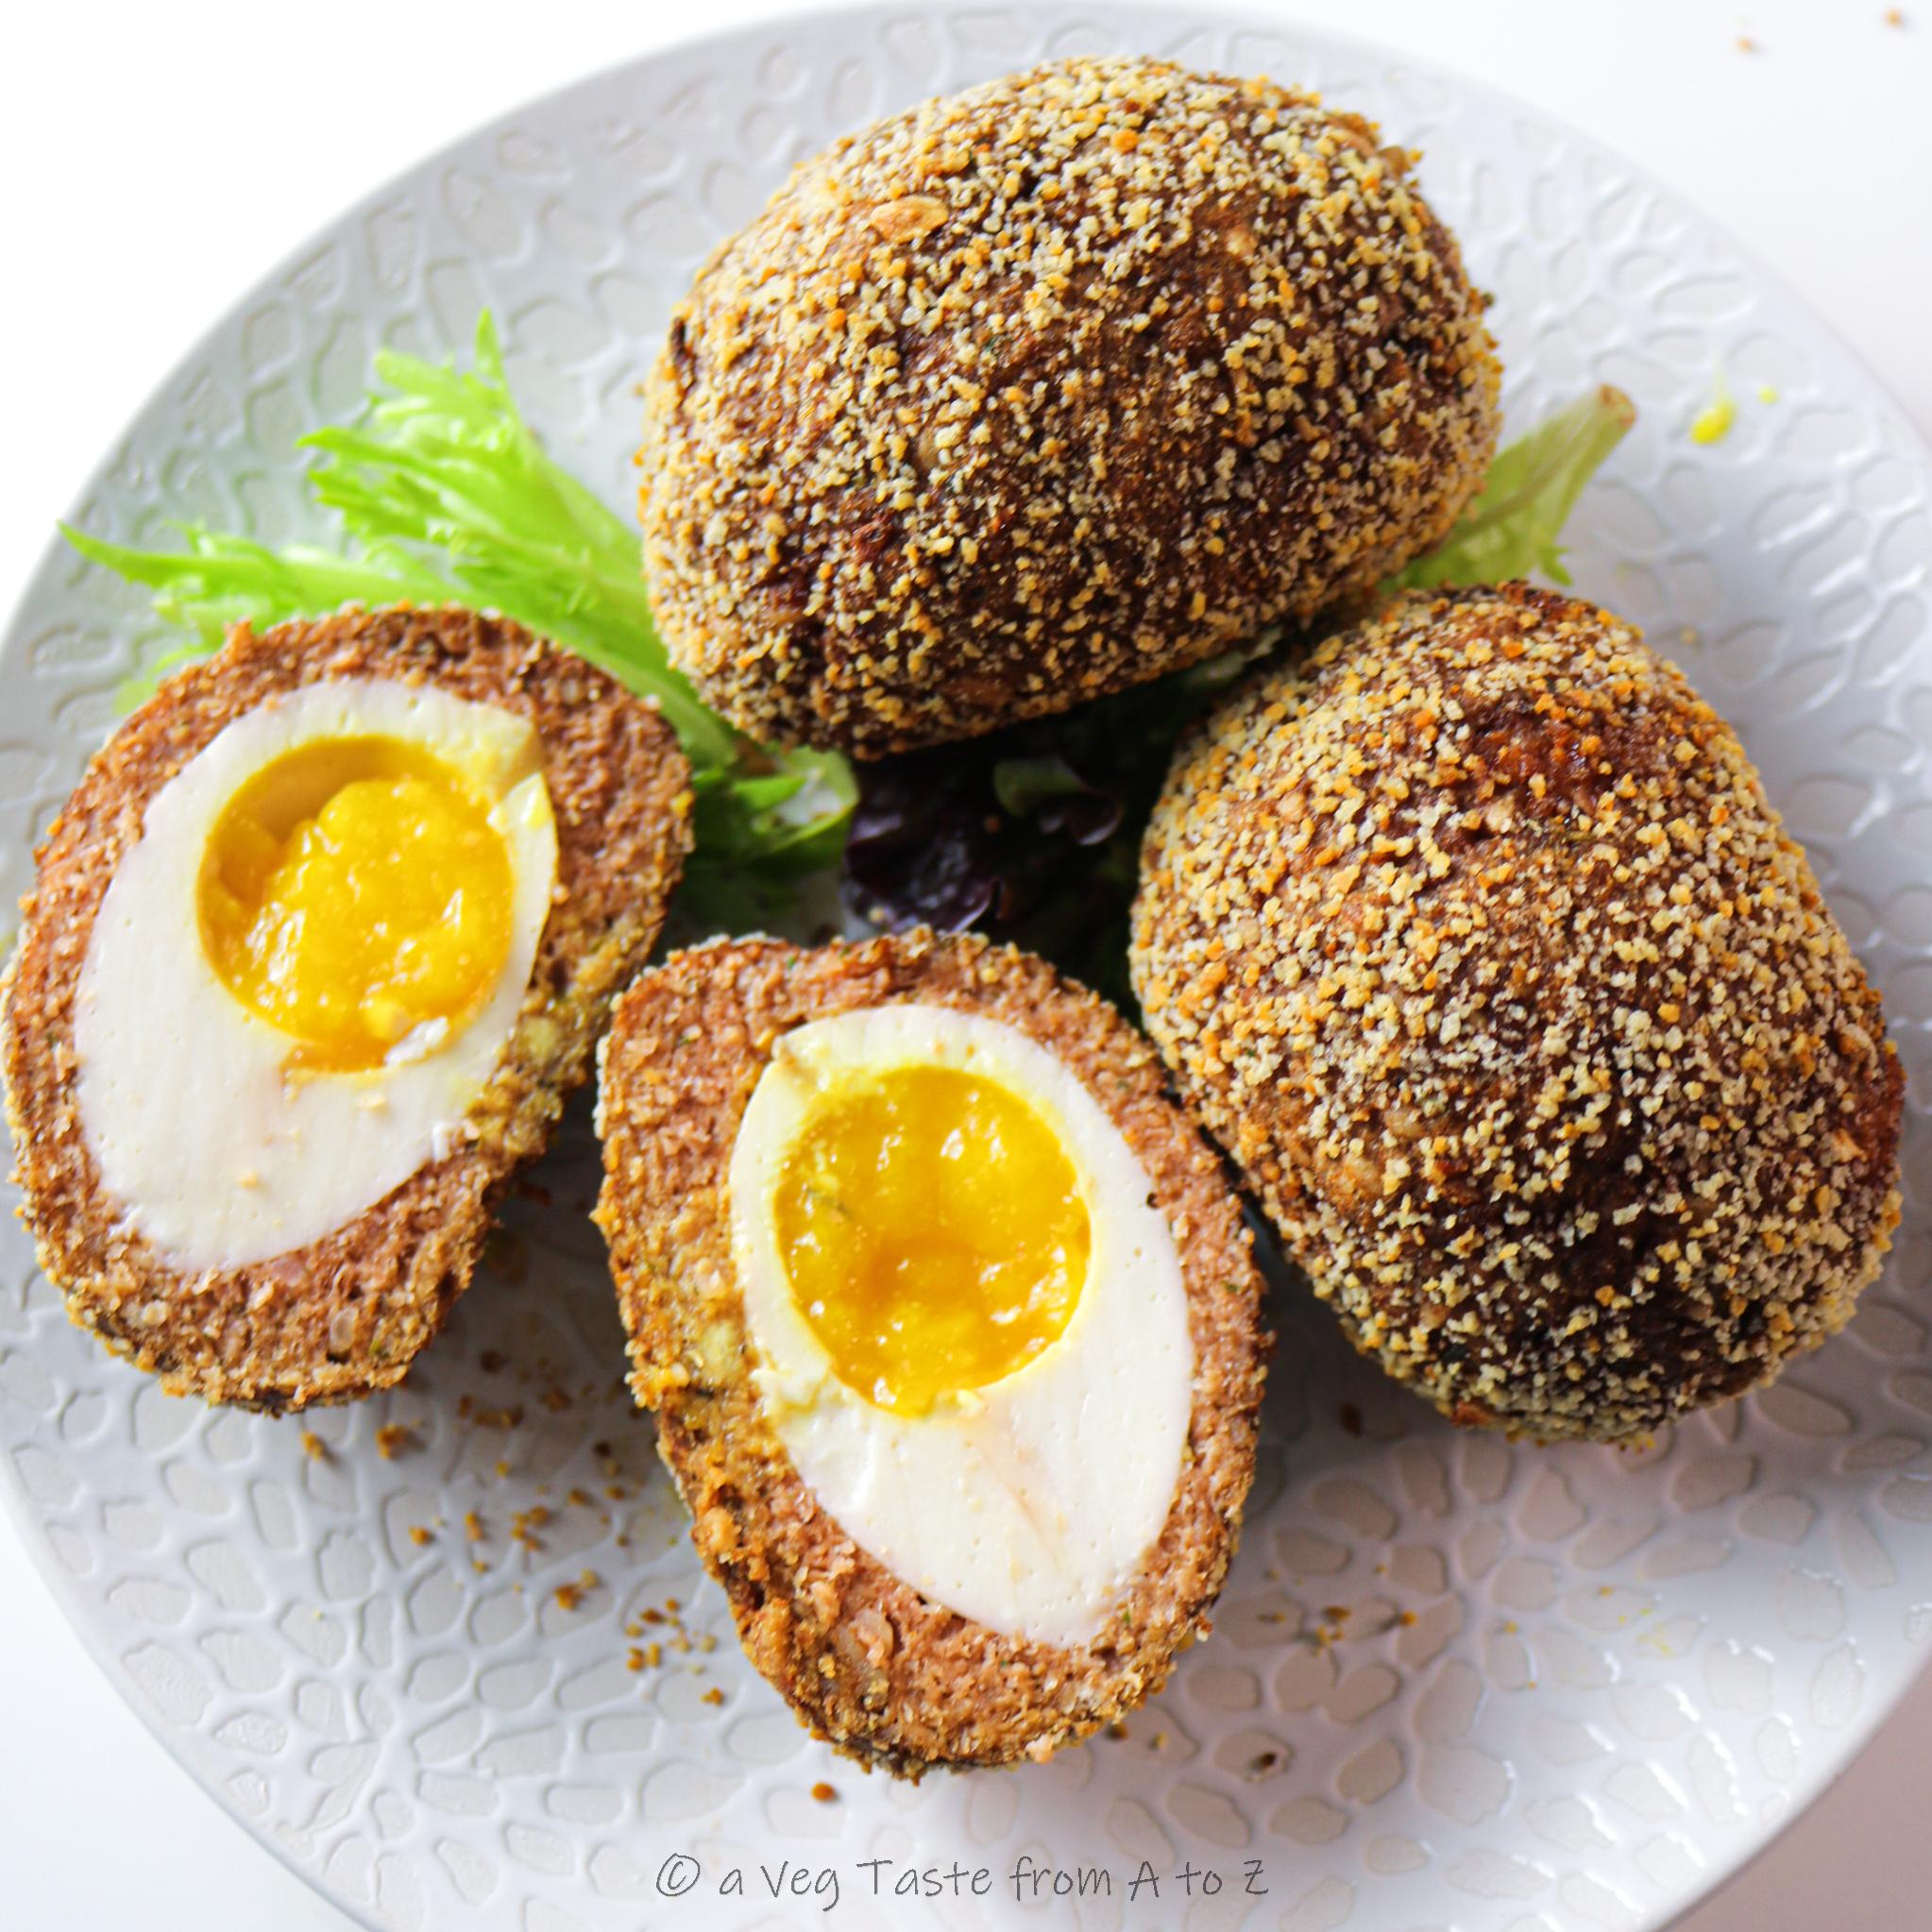 Sure thing! Here are 11 unique photo captions for the Vegan Scotch Eggs recipe: